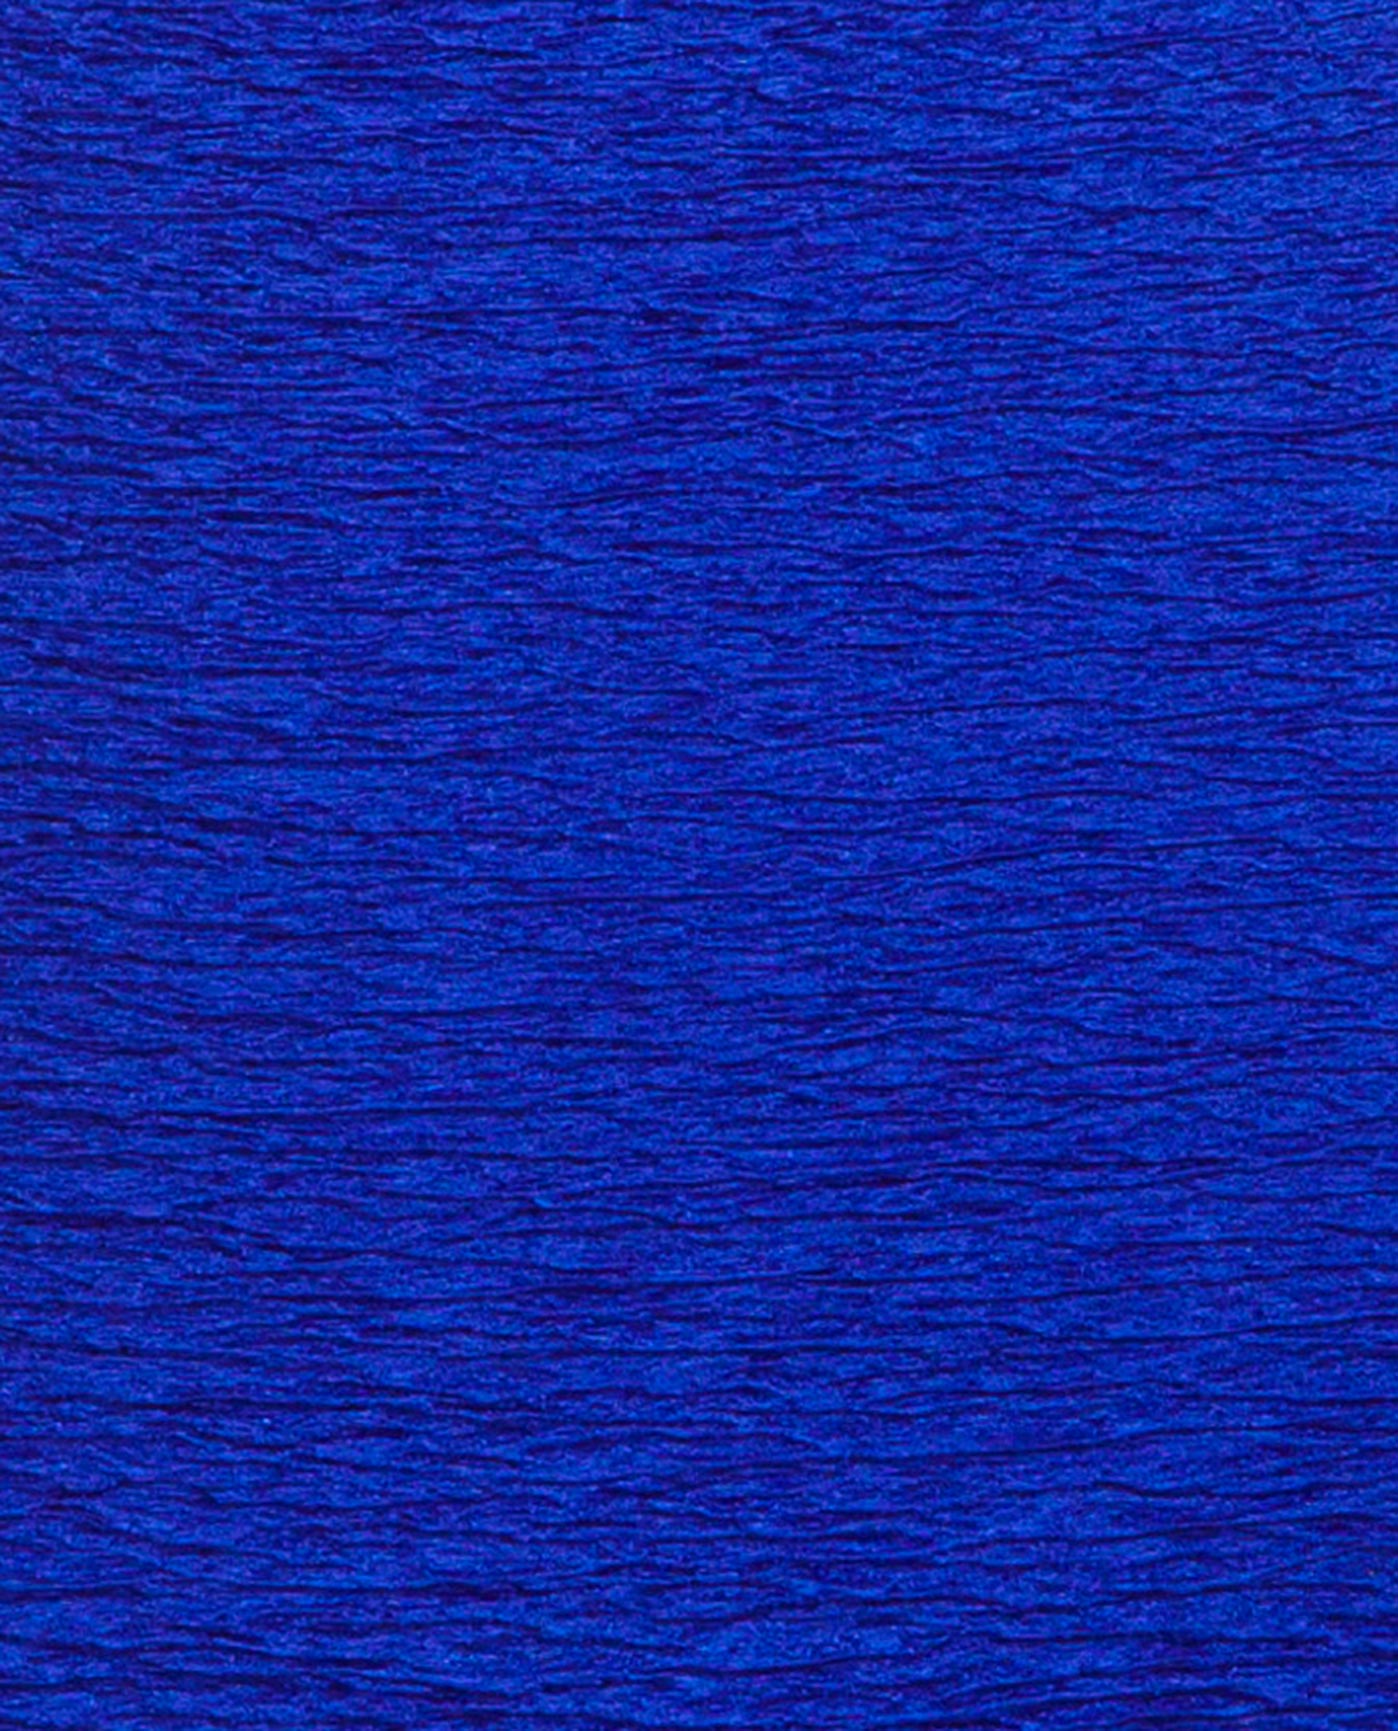 FABRIC DETAIL VIEW OF CHLORINE RESISTANT KRINKLE TEXTURED SOLID TWIST FRONT ONE PIECE | KRINKLE ROYAL